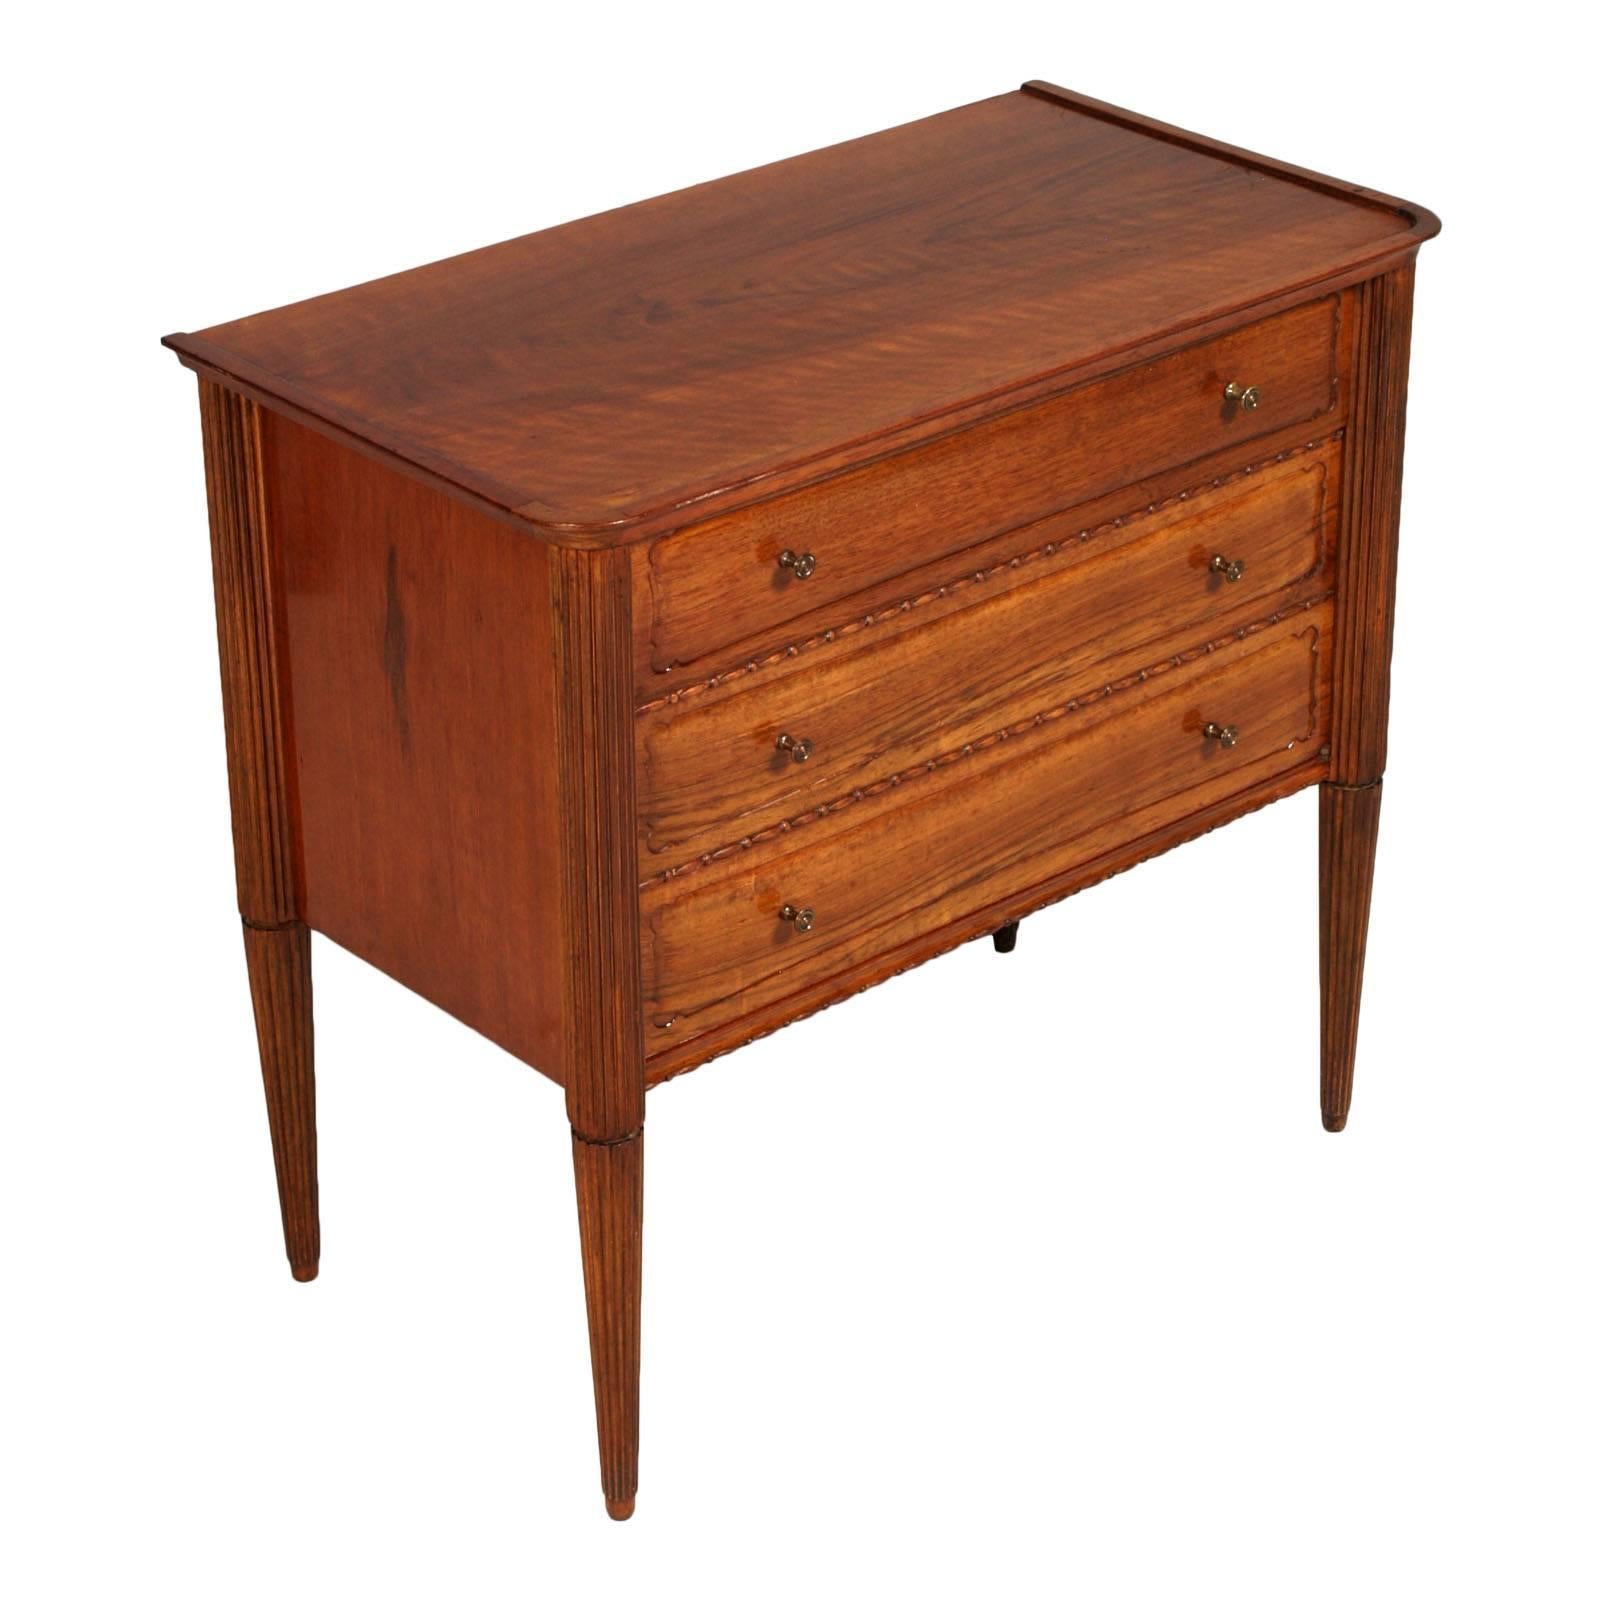 Nice and refined pair of Italy bedside cabinet nightstands Mid-Century Modern, Vittorio Dassi style in walnut. Carved legs, drawers and contours richly carved.

Measure in cm: H 60, W 63, D 34.